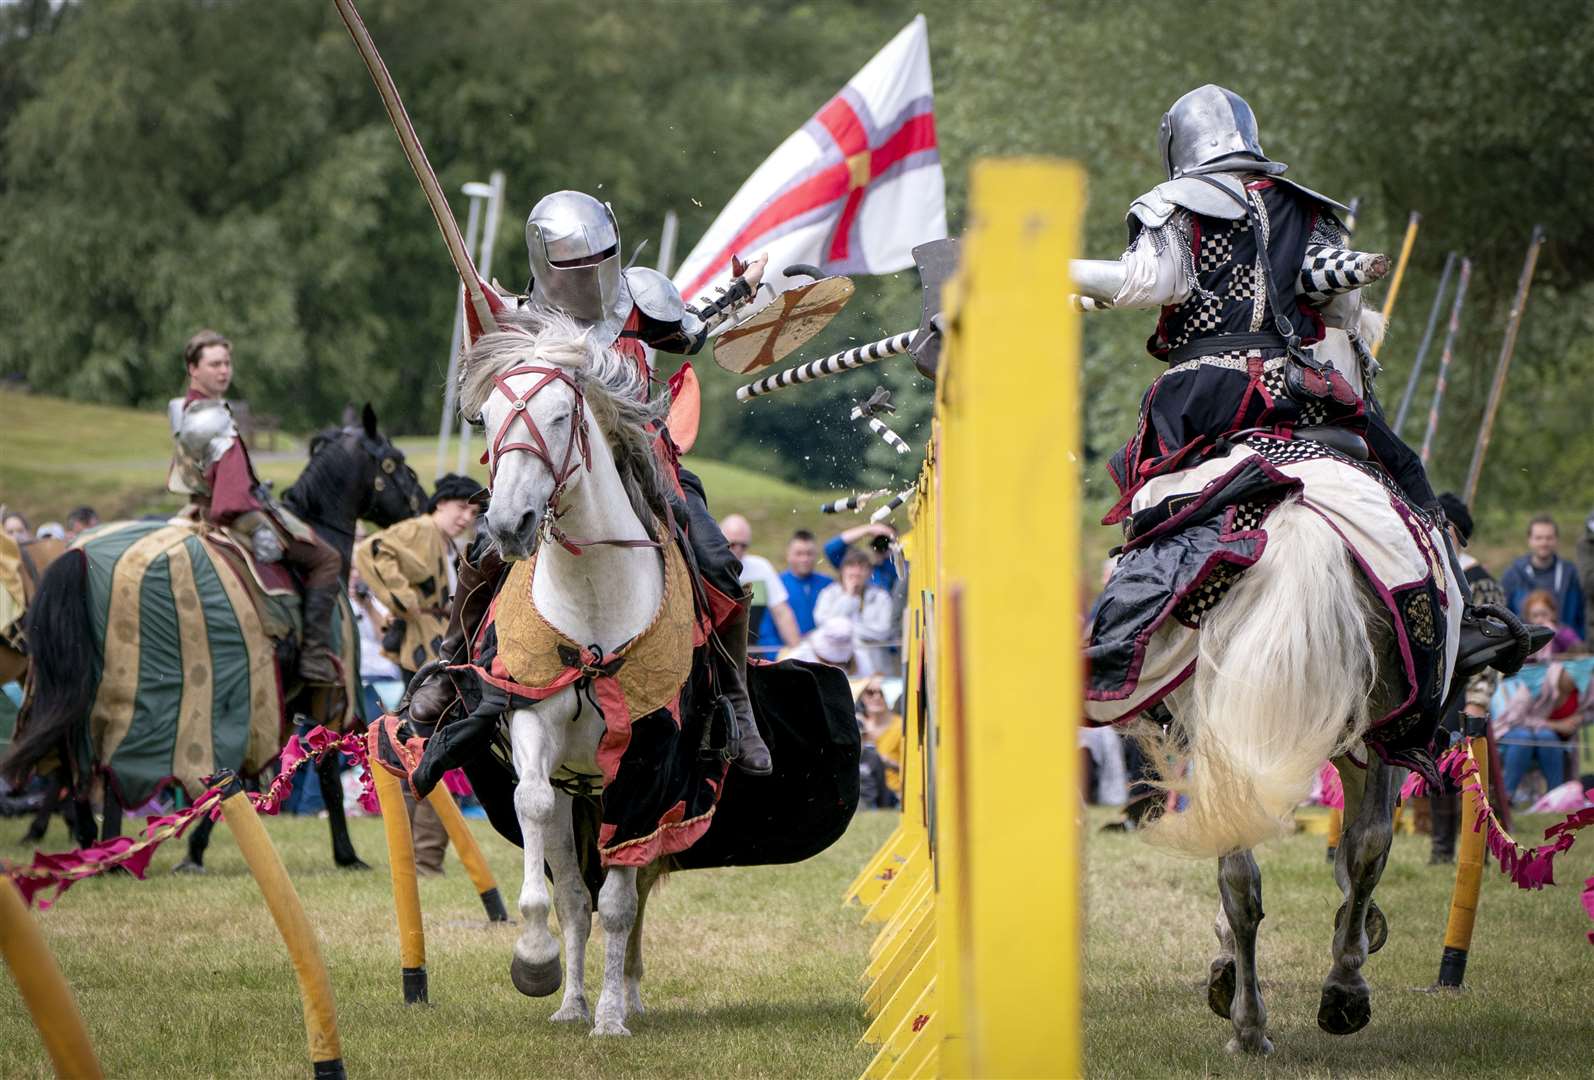 Participants in full armour brace during a charge at the annual jousting tournament at Linlithgow Palace in West Lothian (Jane Barlow/PA)